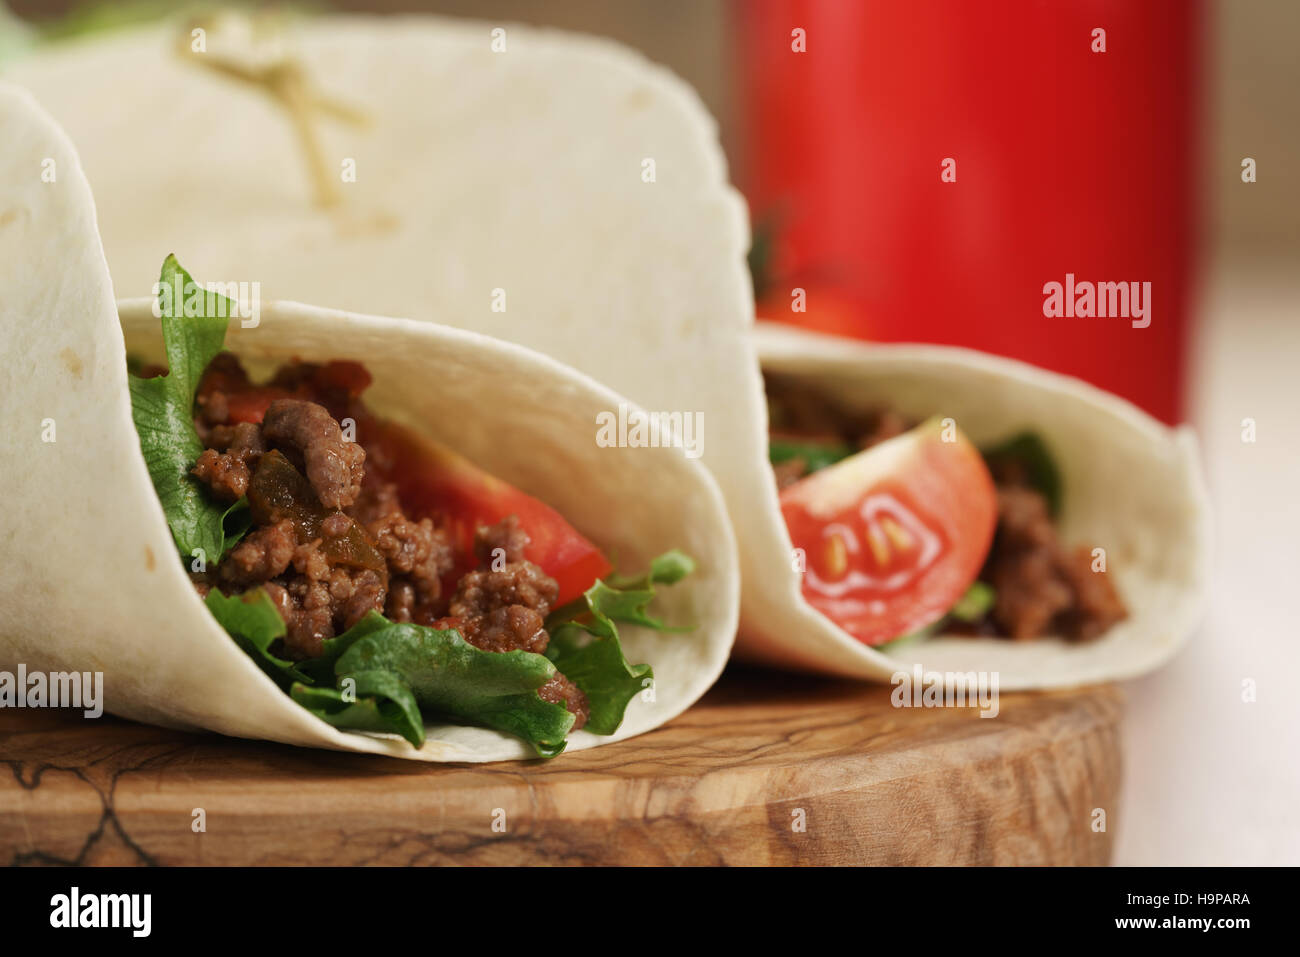 homemade tortilla with beef, frillice and vegetables and drink on wooden board Stock Photo